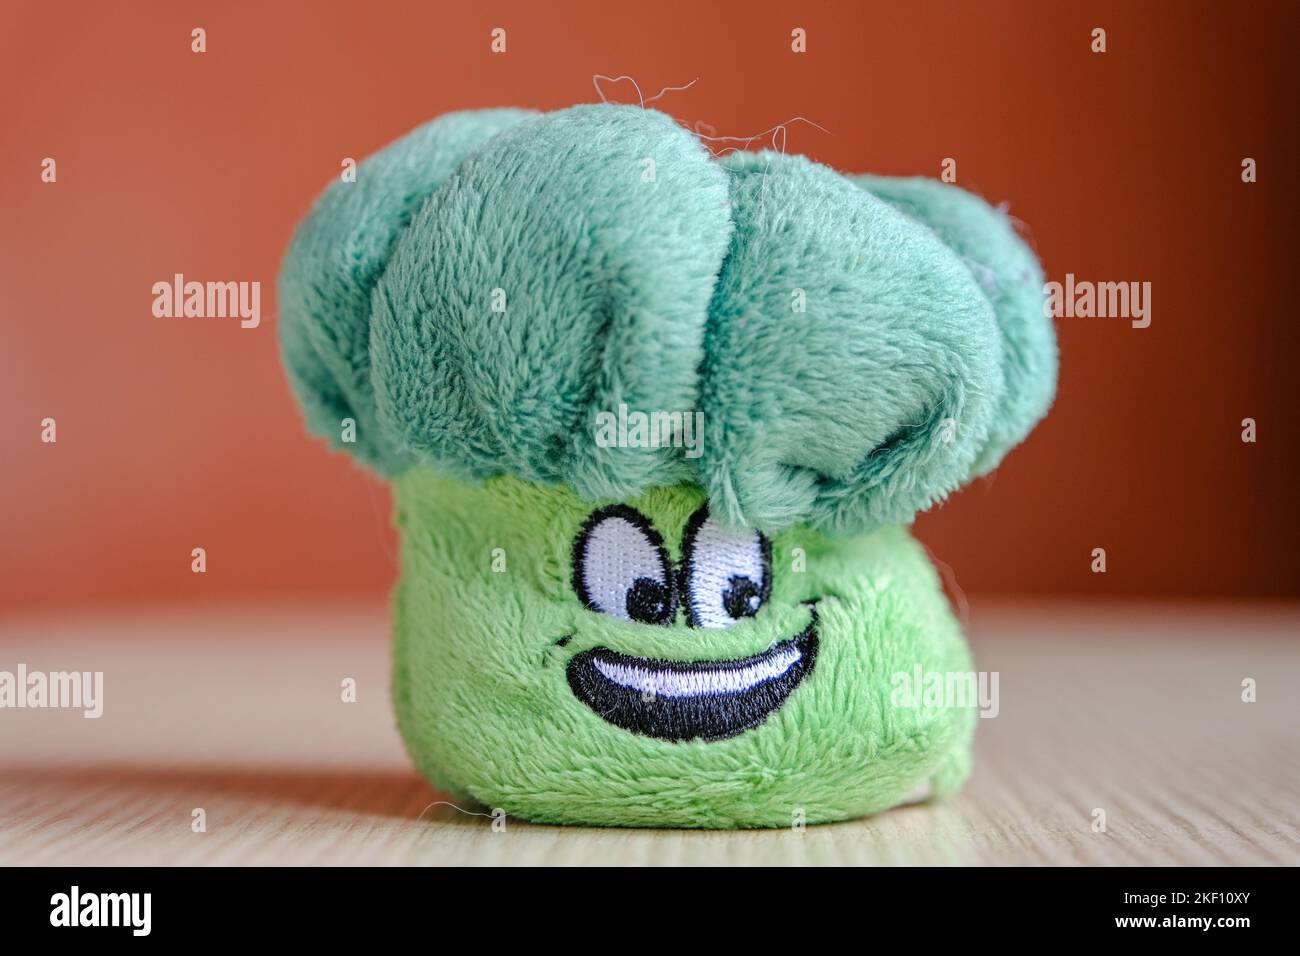 Soft plush toy for children - green broccoli. Broccoli with a happy face. Children's toy close-up, space for text. Stock Photo